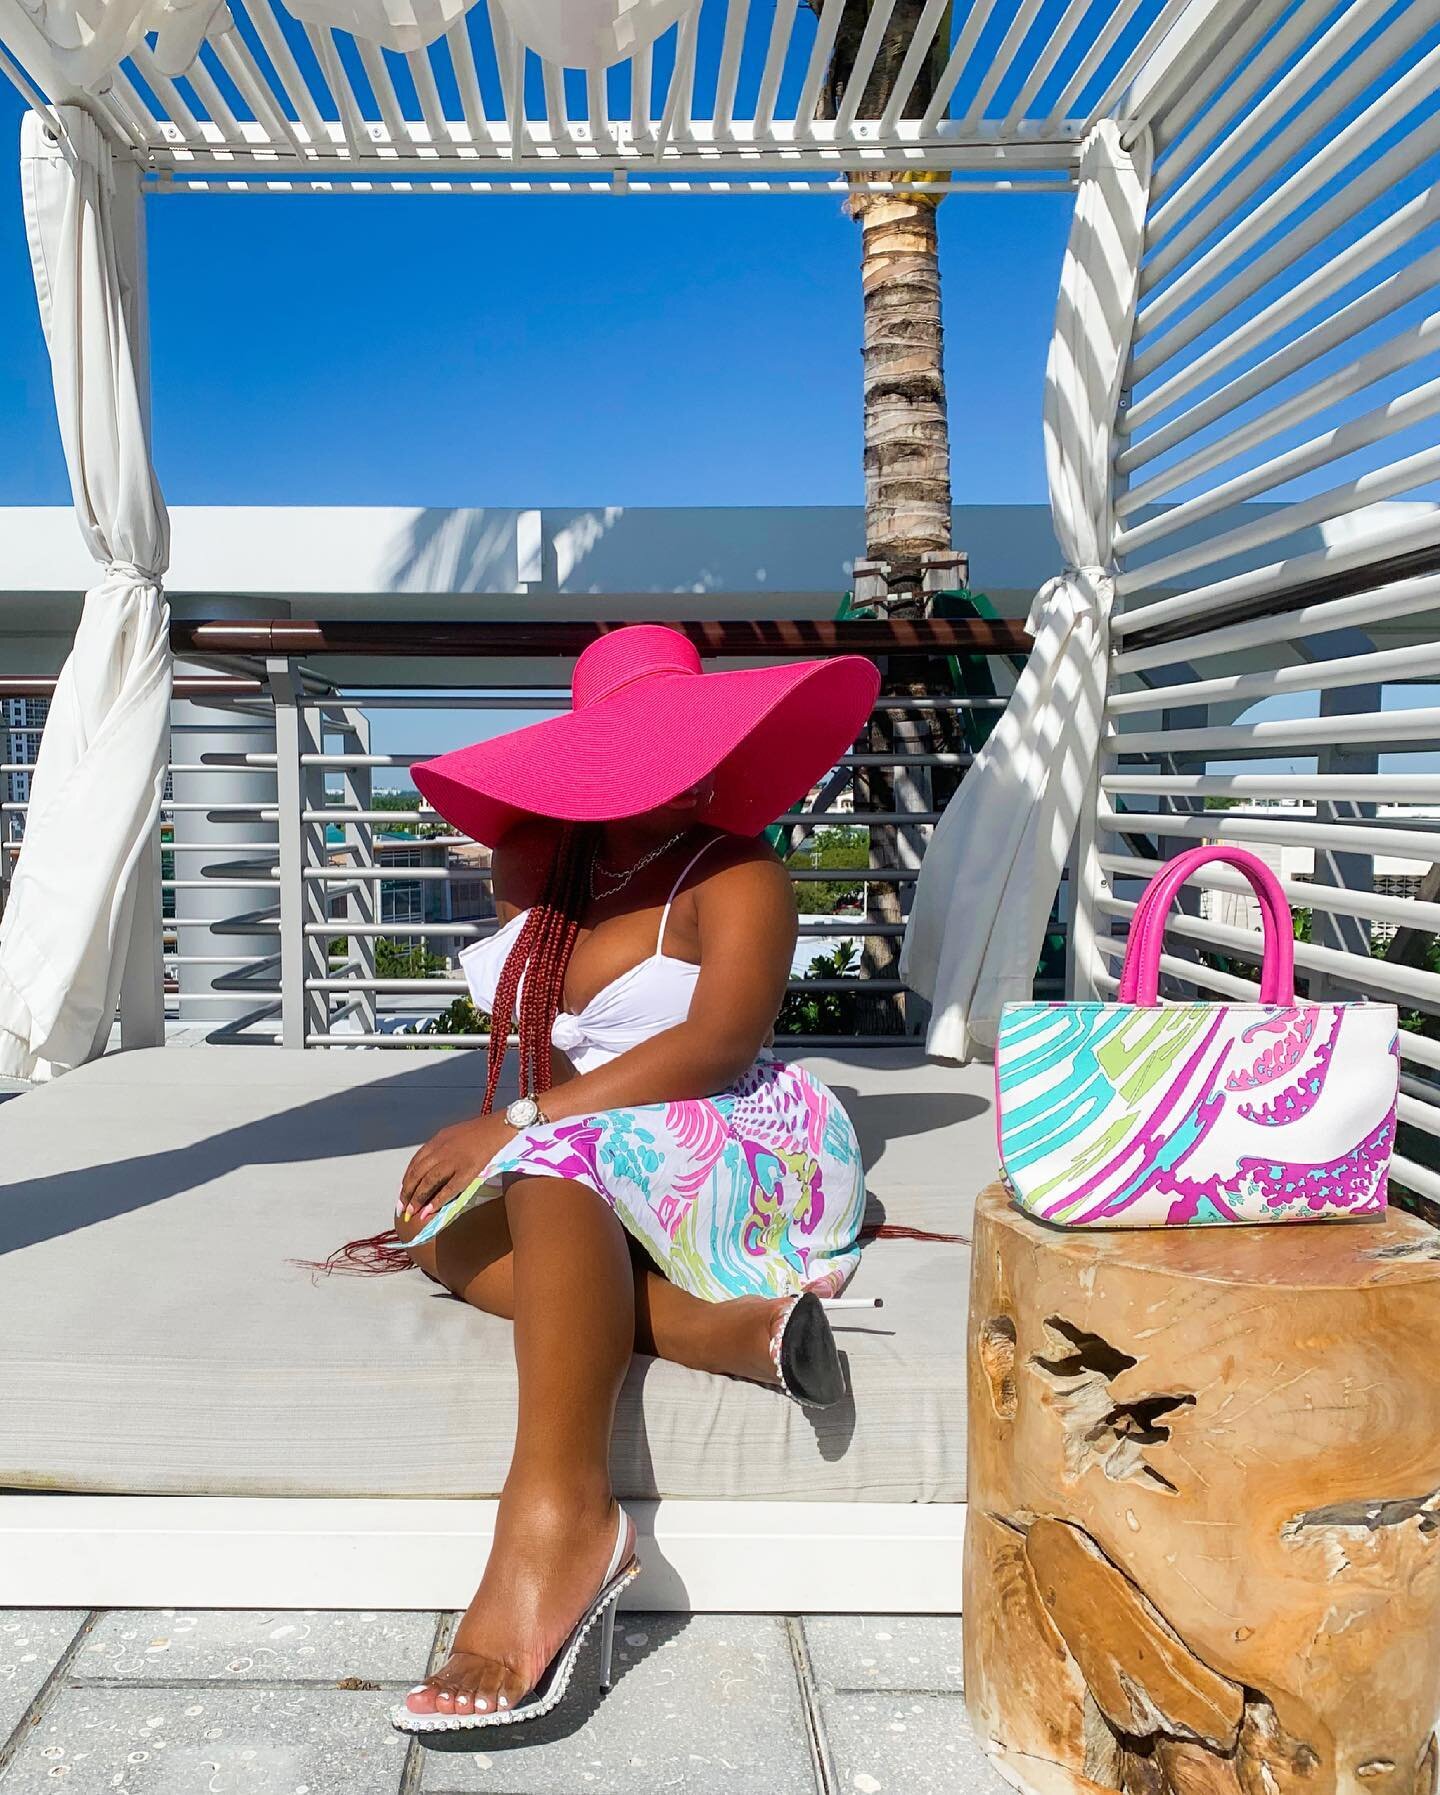 ✨Vintage Pucci and Sunhats✨
*
What&rsquo;s your favorite summer accessory? 
*
*
*
*
#therichaunt #soultravel #melaninmagic #blacktraveler #nycblogger #blackblogger #travelphotographer #miamilifestyle #southbeachmiami #flyfashiondoll #miamiphotography